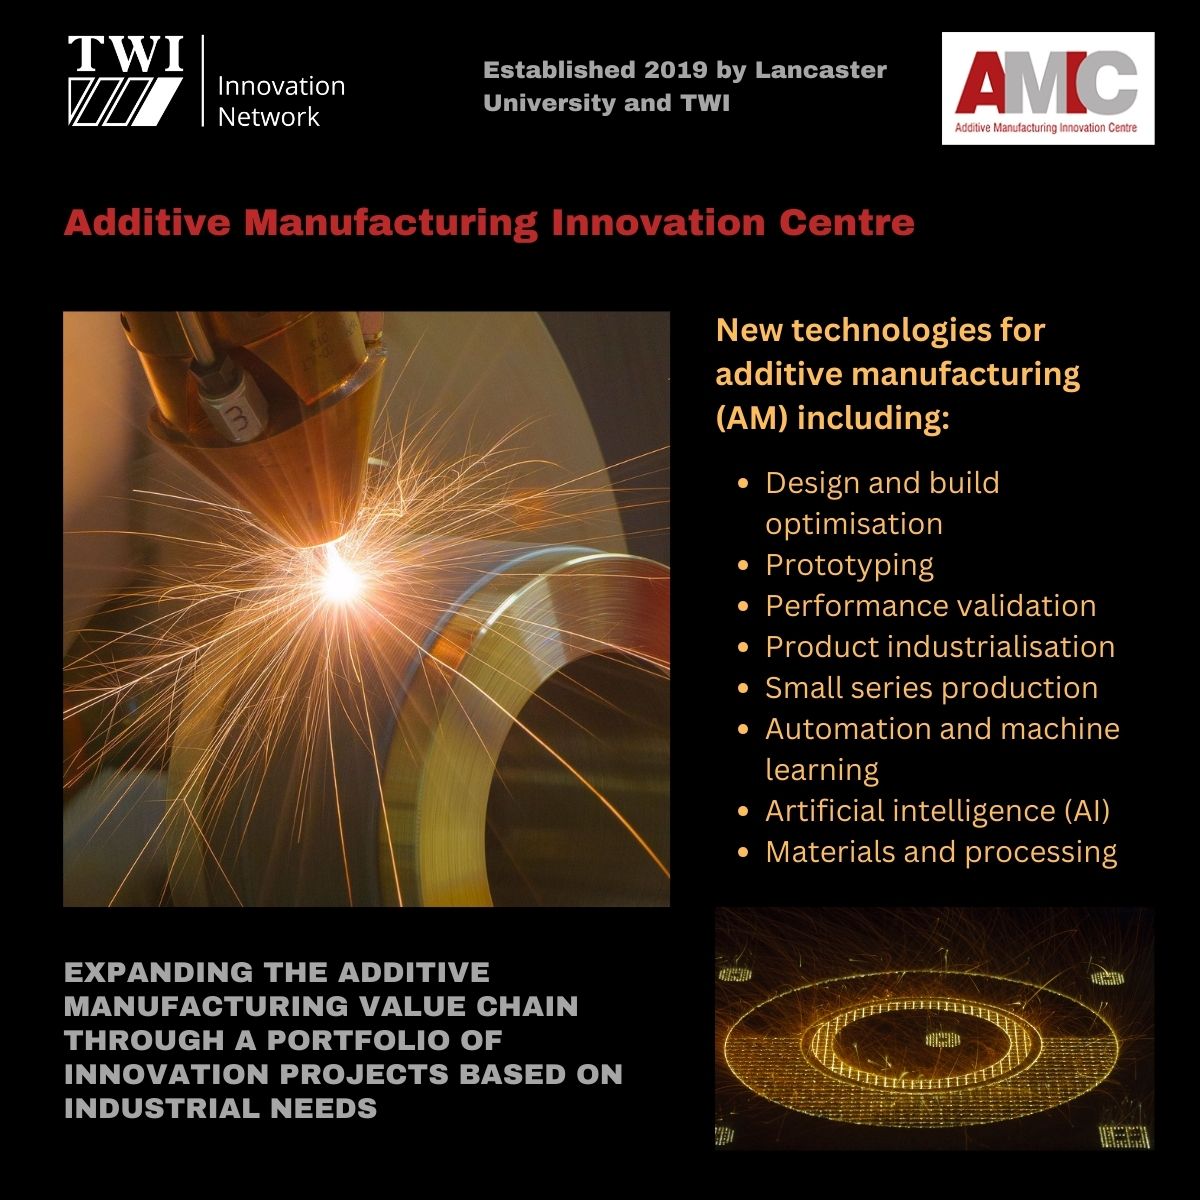 What is a @TWI_Ltd Innovation Centre? A partnership between TWI and a top university focused on collaborative R&D of new technologies enabled by successful bids for UK and EU grants. Introducing the Additive Manufacturing Innovation Centre: @LancasterUni rb.gy/cpcy58